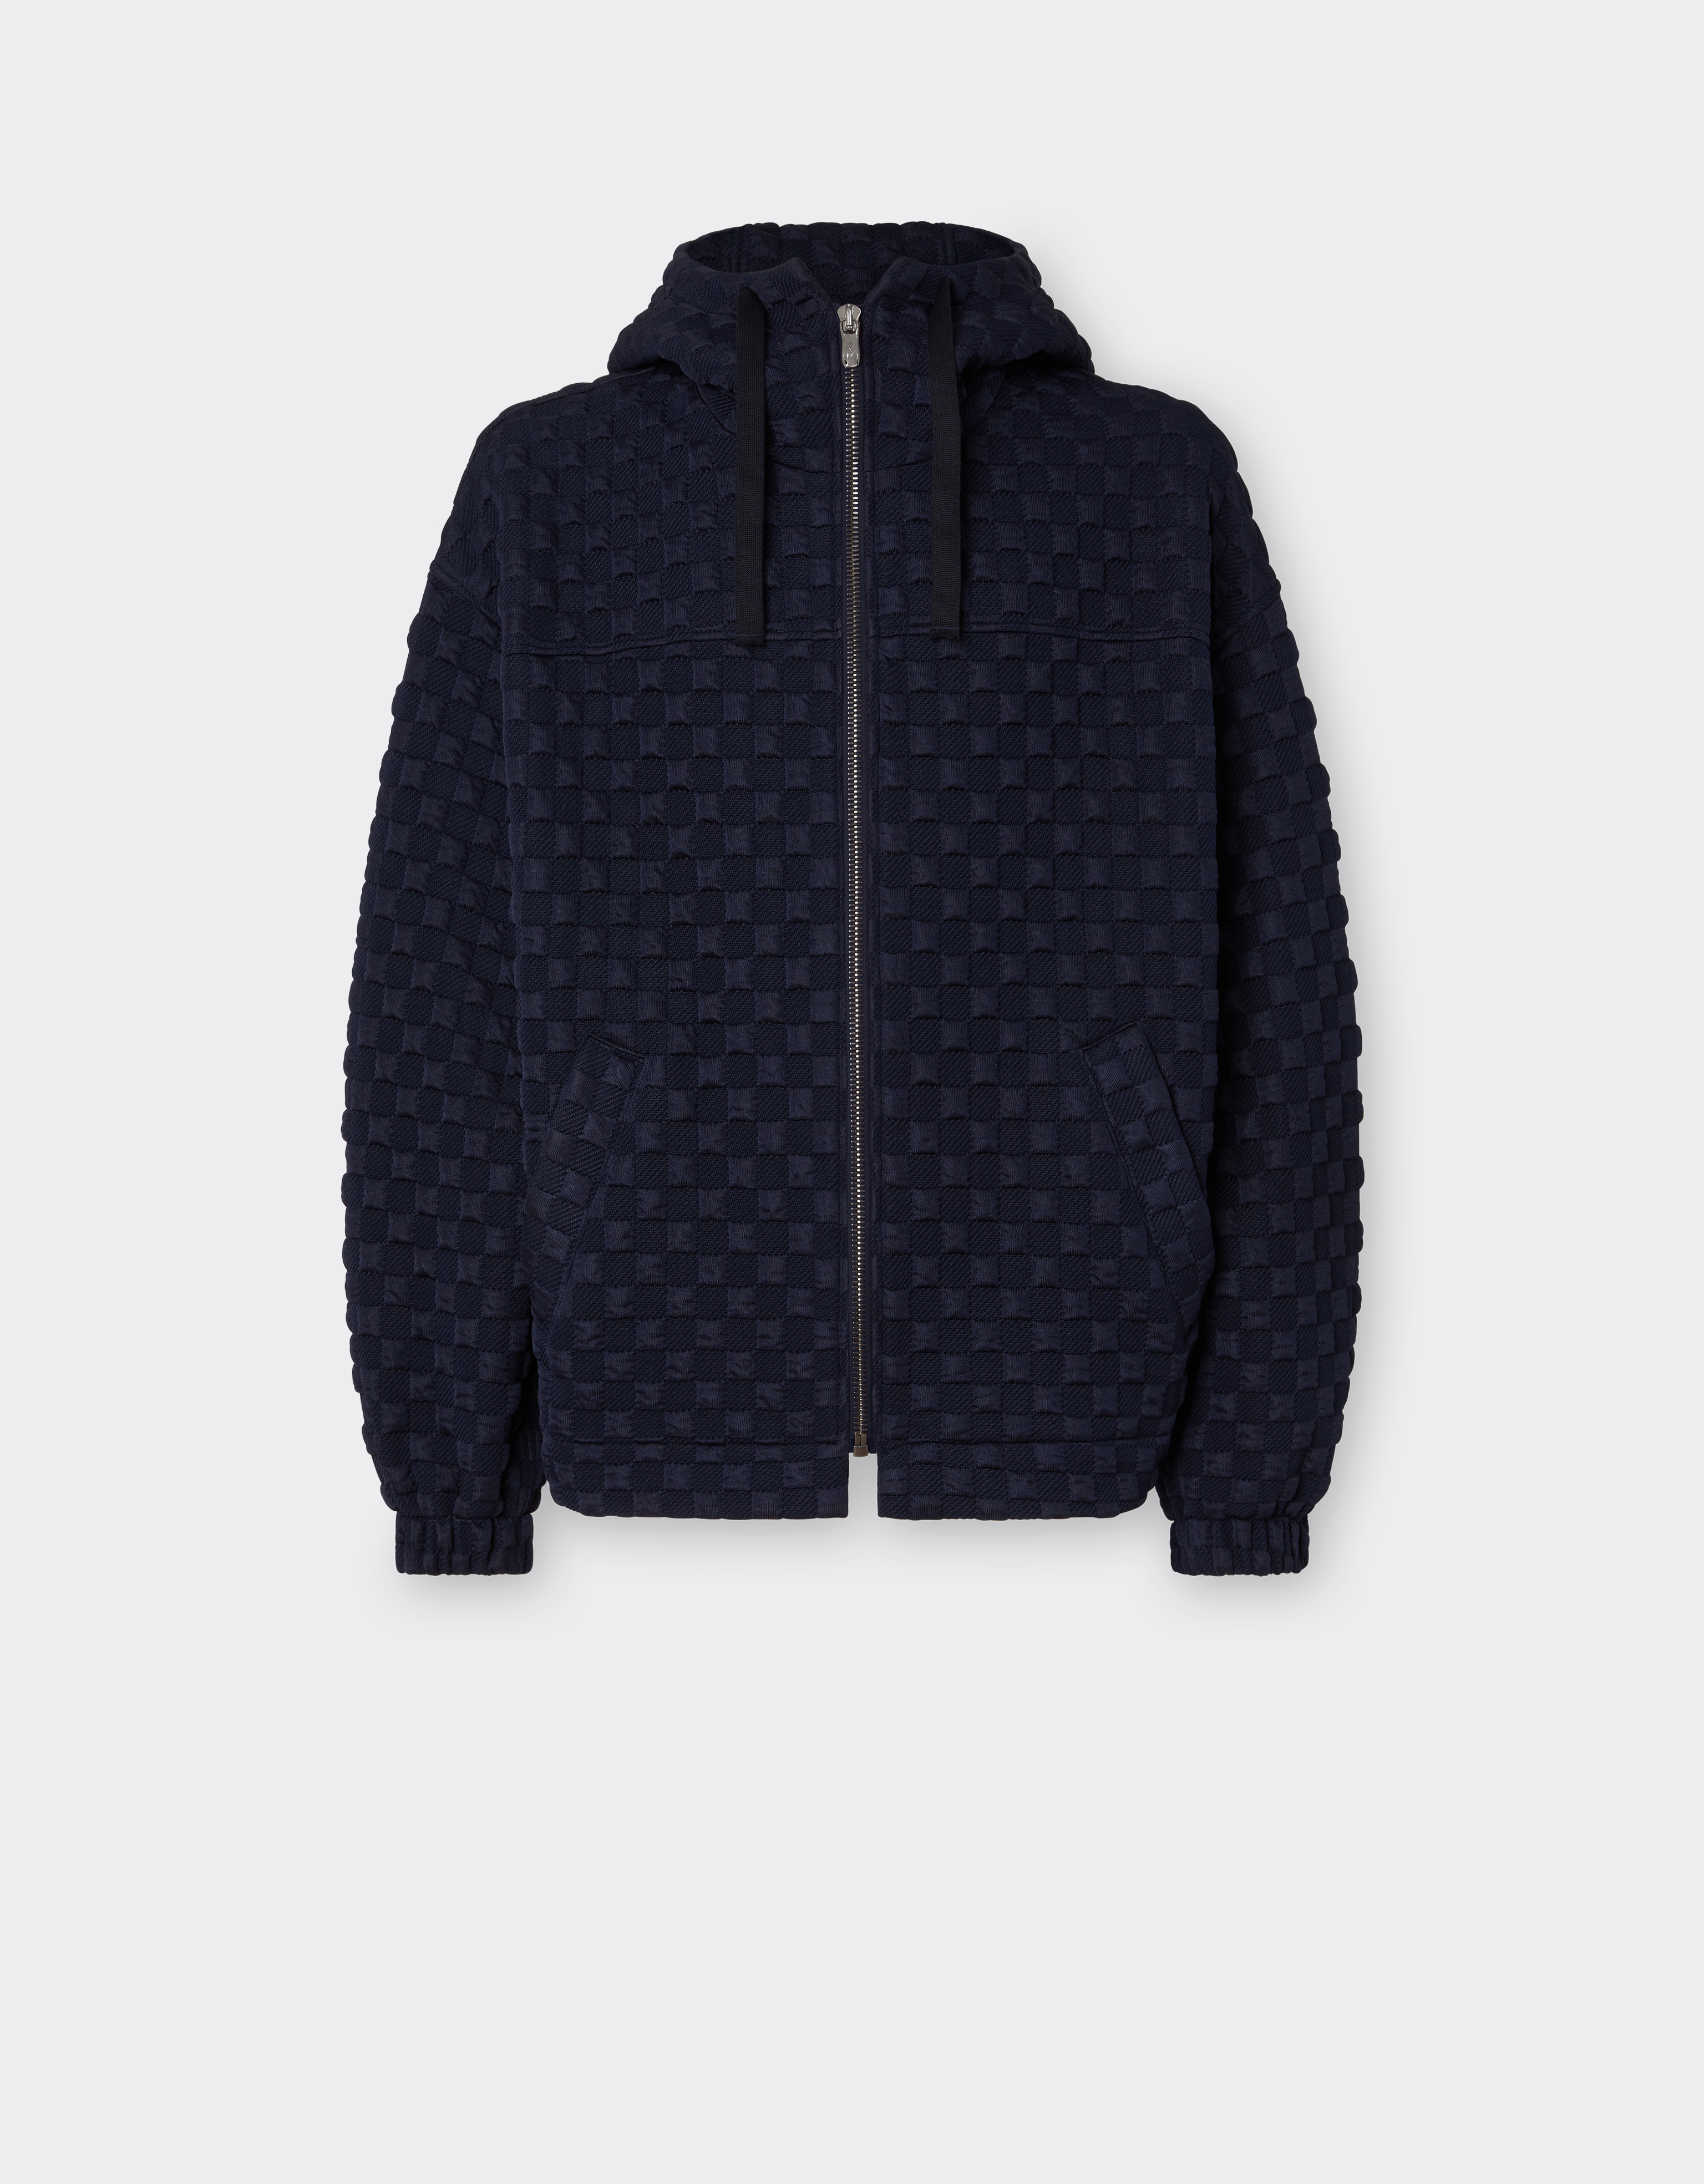 Shop Ferrari Jacquard Jumper With Hood And Zip In Navy